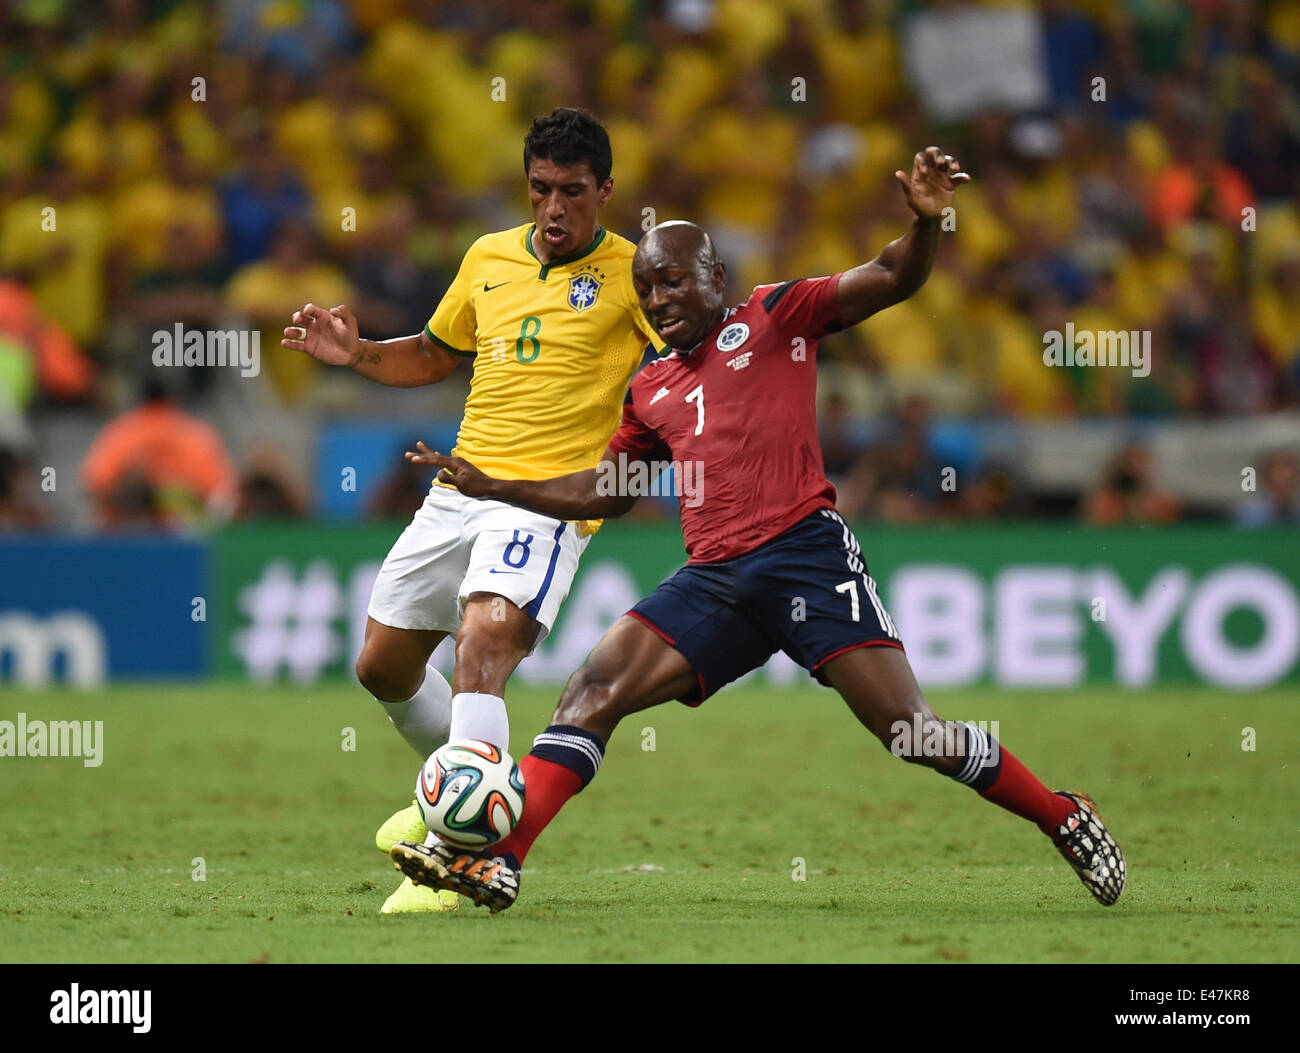 Fortaleza, Brazil. 04th July, 2014. Paulinho (L) of Brazil and Pablo Armero of Colombia vie for the ball during the FIFA World Cup 2014 quarter final match soccer between Brazil and Colombia at the Estadio Castelao in Fortaleza, Brazil, 04 July 2014. Photo: Marius Becker/dpa/Alamy Live News Stock Photo